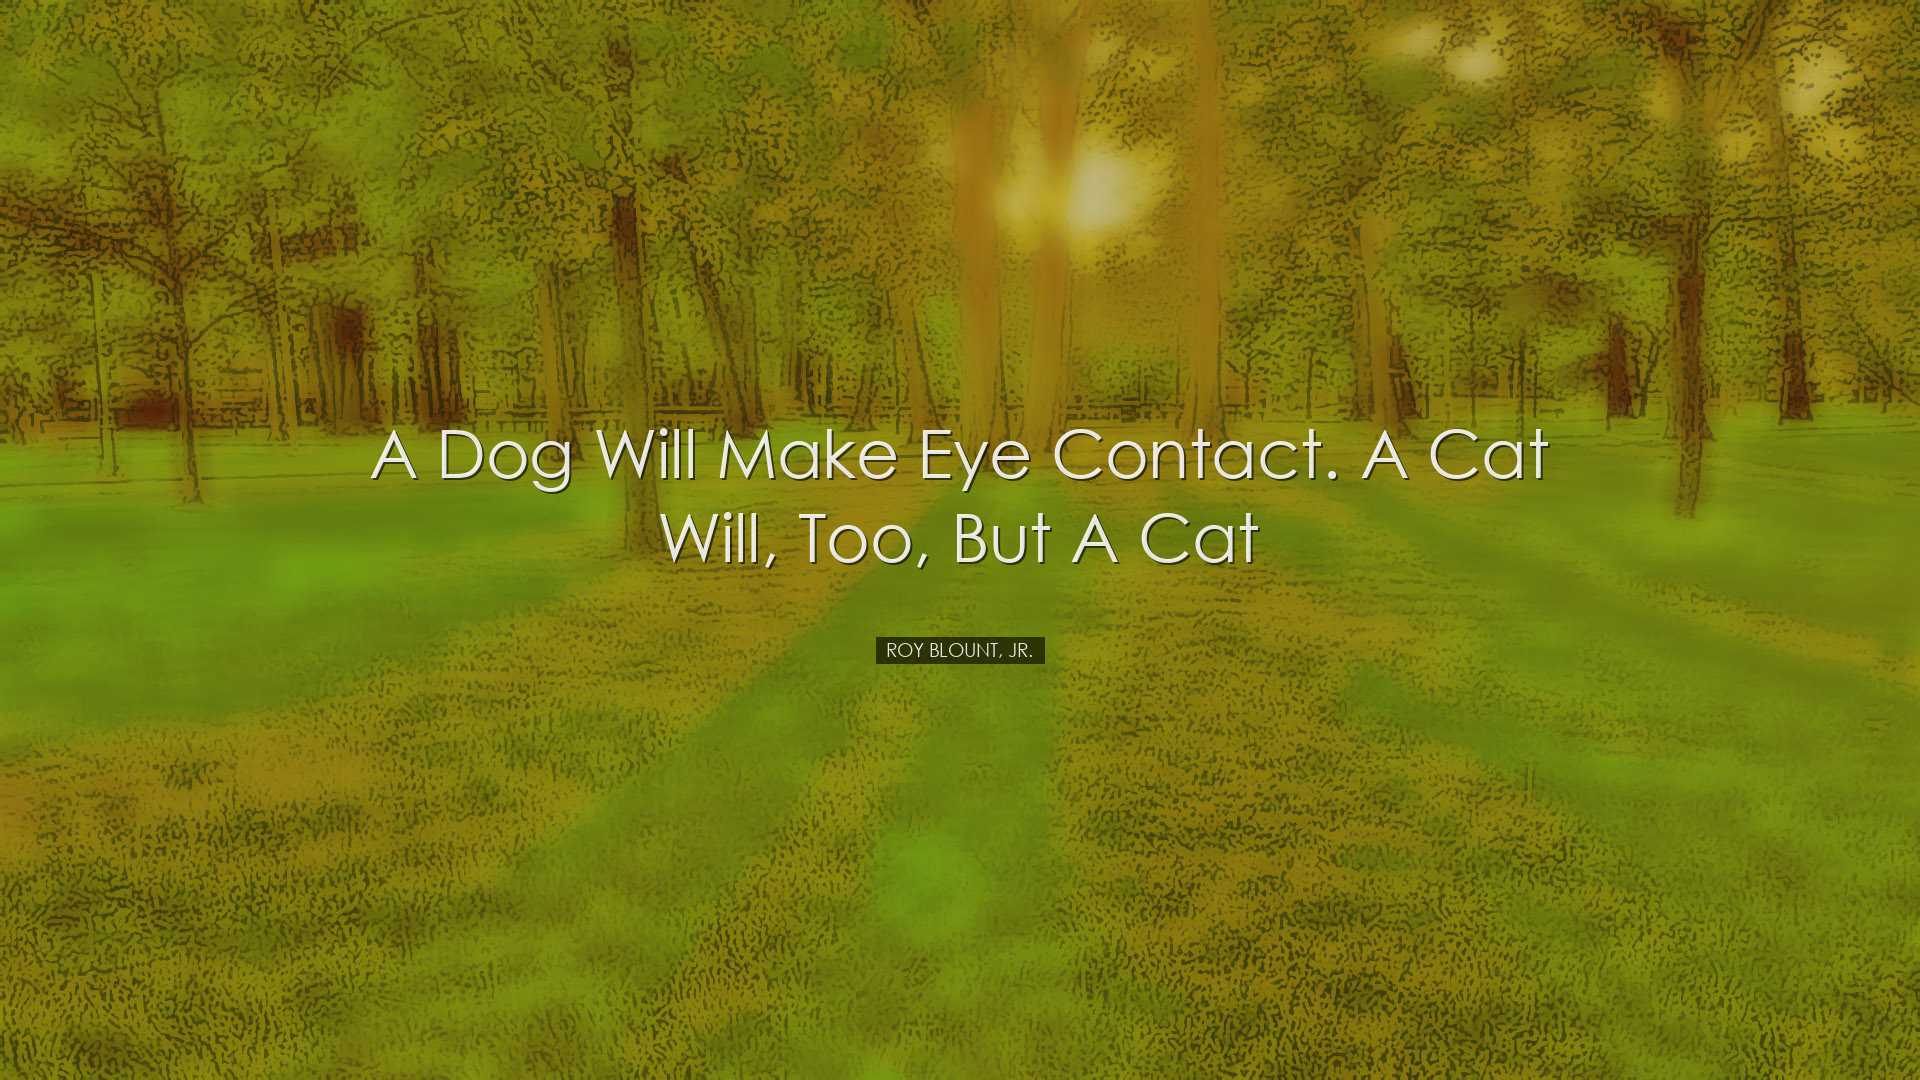 A dog will make eye contact. A cat will, too, but a cat - Roy Blou